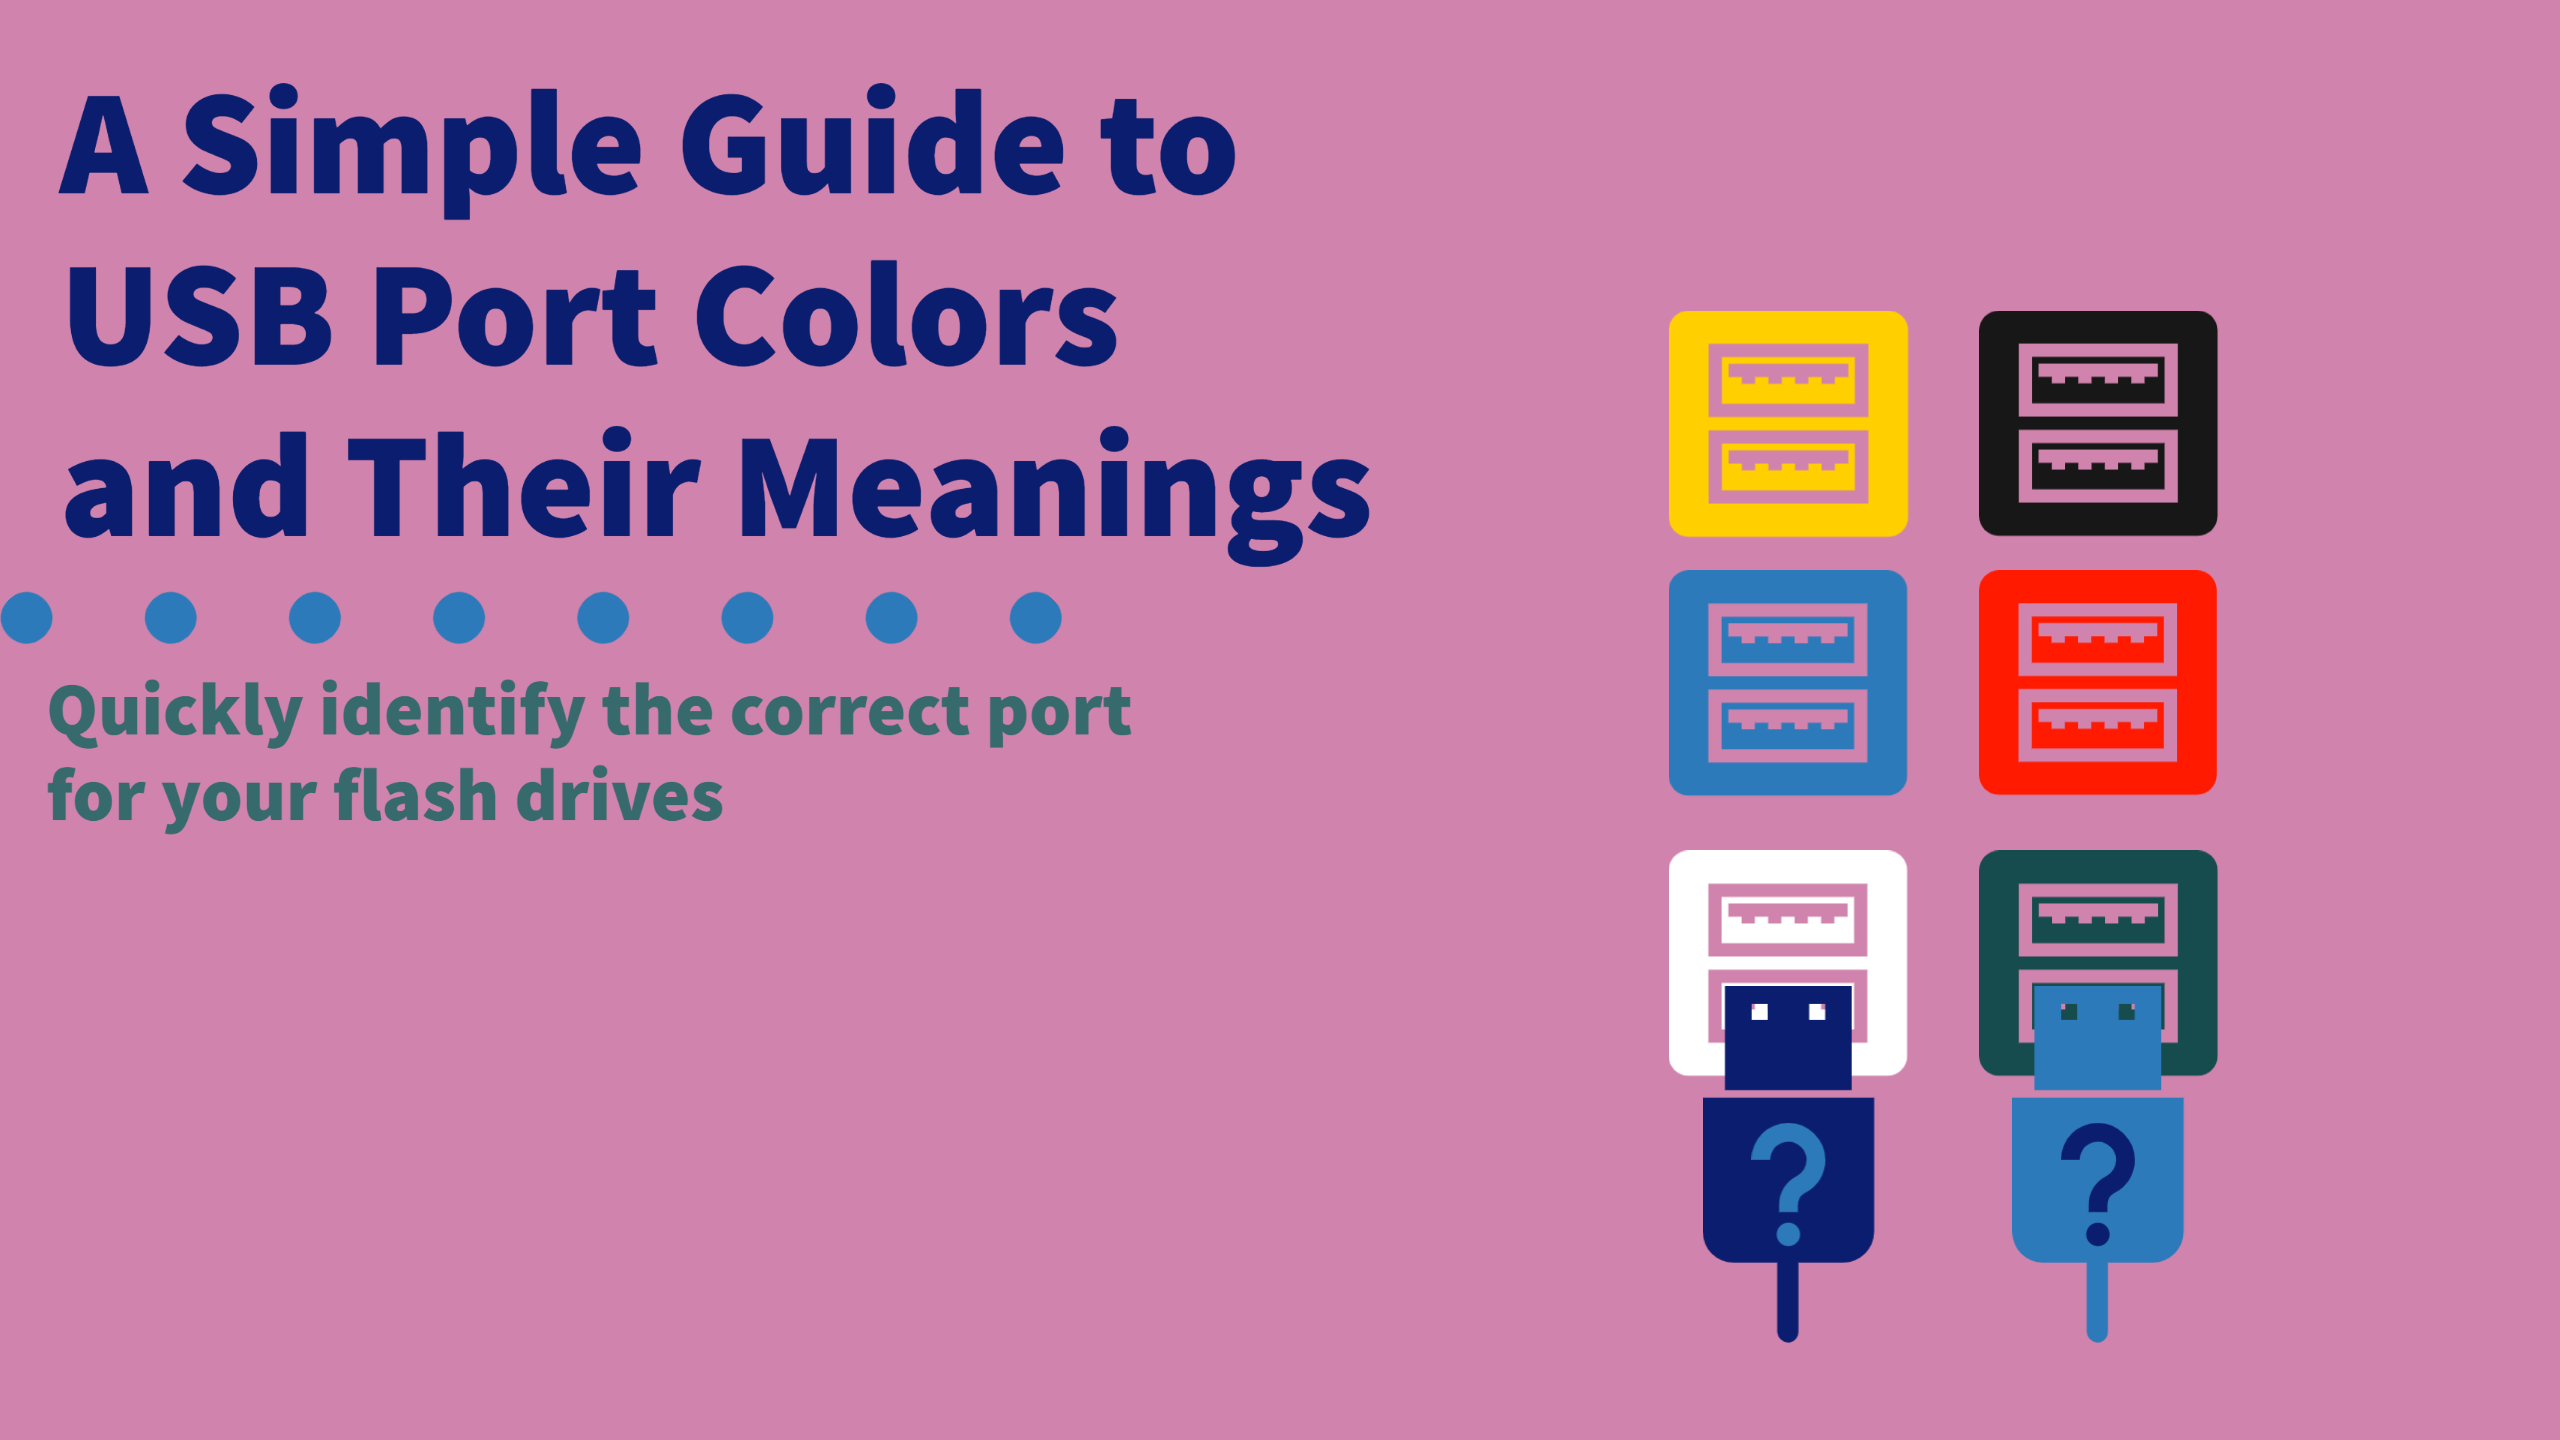 A Simple Guide to USB Port Colors and Their Meanings